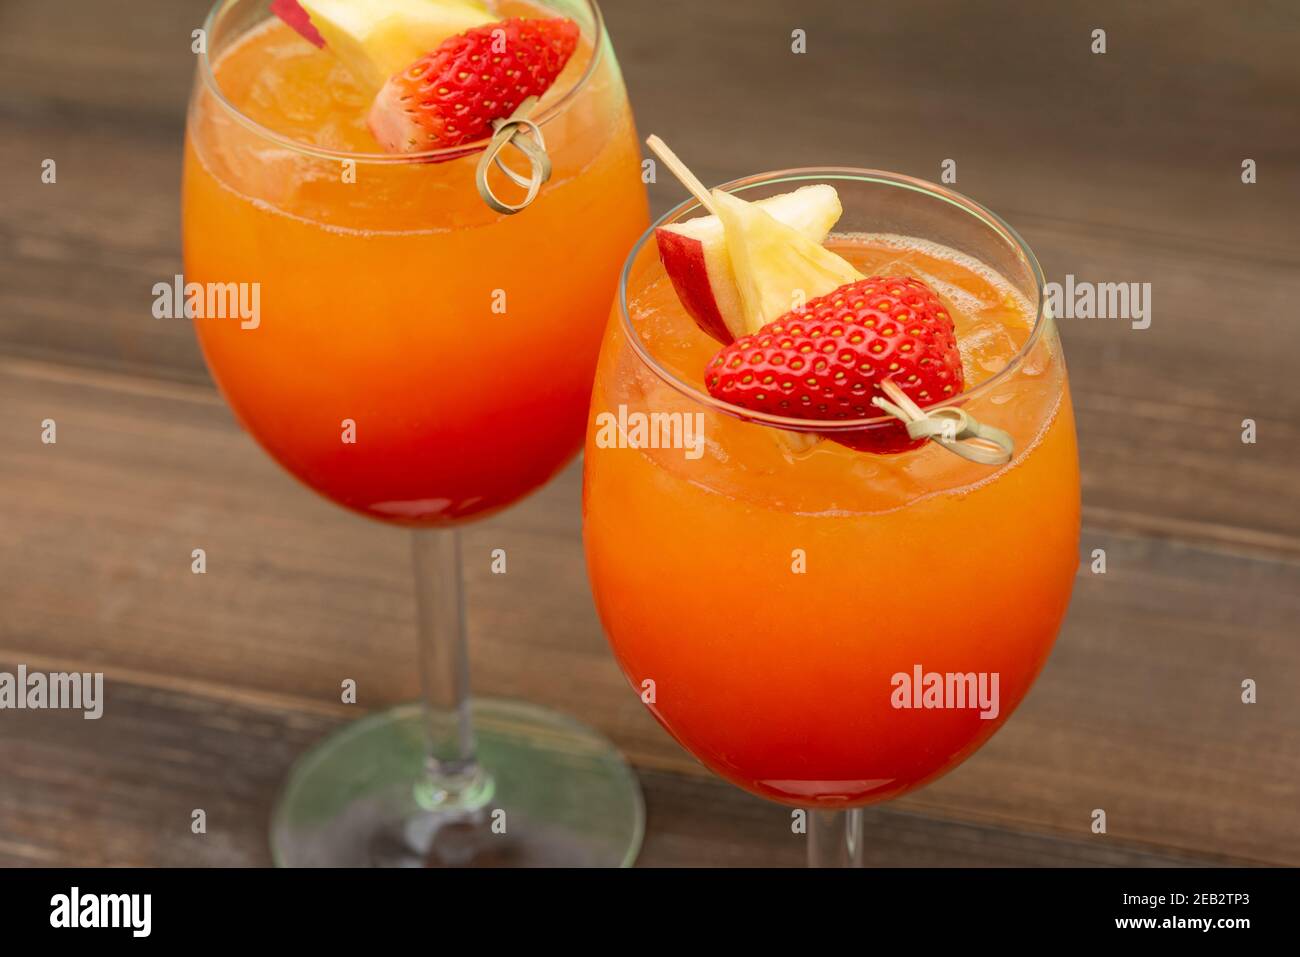 Colorful refreshing strawberry orange sunrise cocktail drinks in the glasses on wood table background Stock Photo